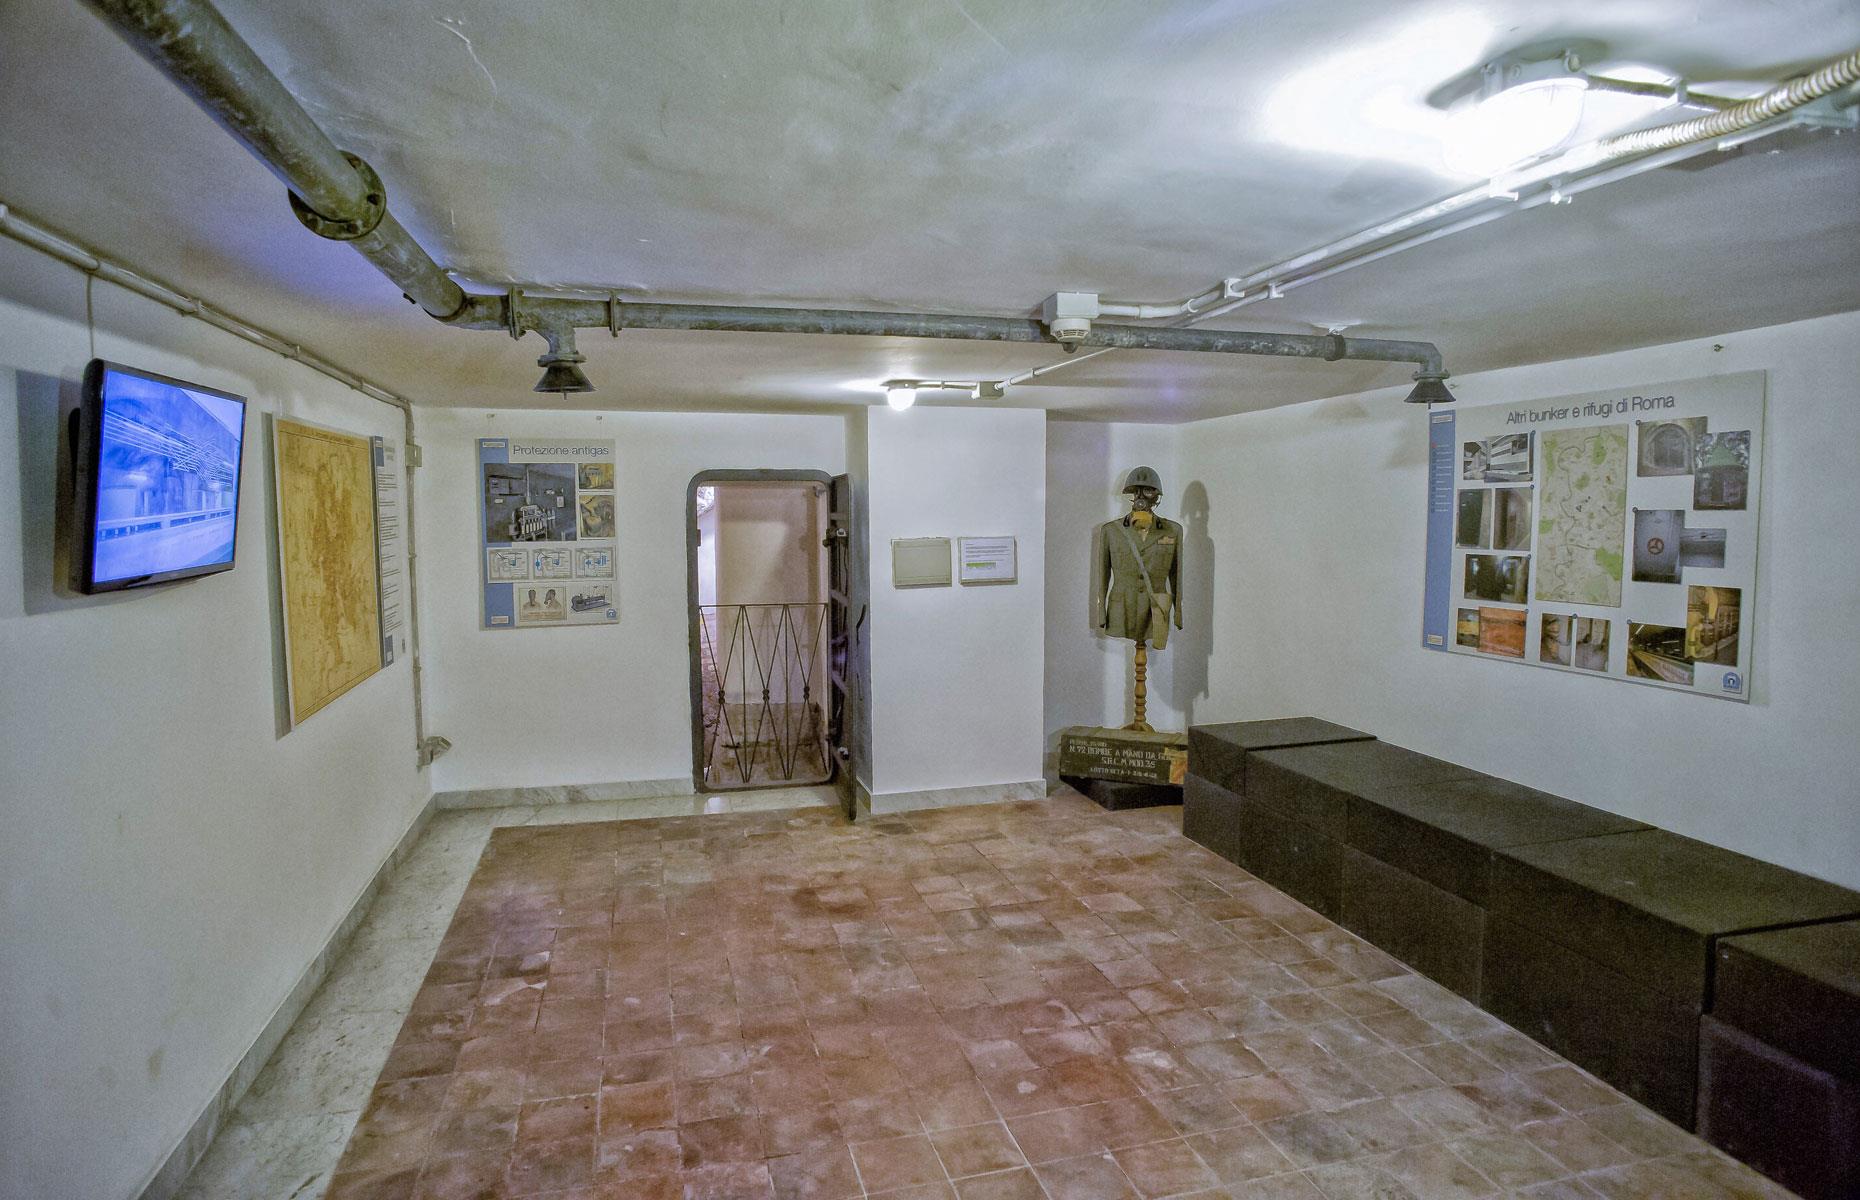 <p>Mussolini was ousted from power and arrested in July 1943, and the third and final Villa Torlonia bunker was never completed. The estate was eventually bought by the Municipality of Rome and turned into a museum. The bunkers were initially opened to the public in 2006, but had to close for a time due to high radon levels, and levels of the radioactive gas are strictly monitored to this day.</p>